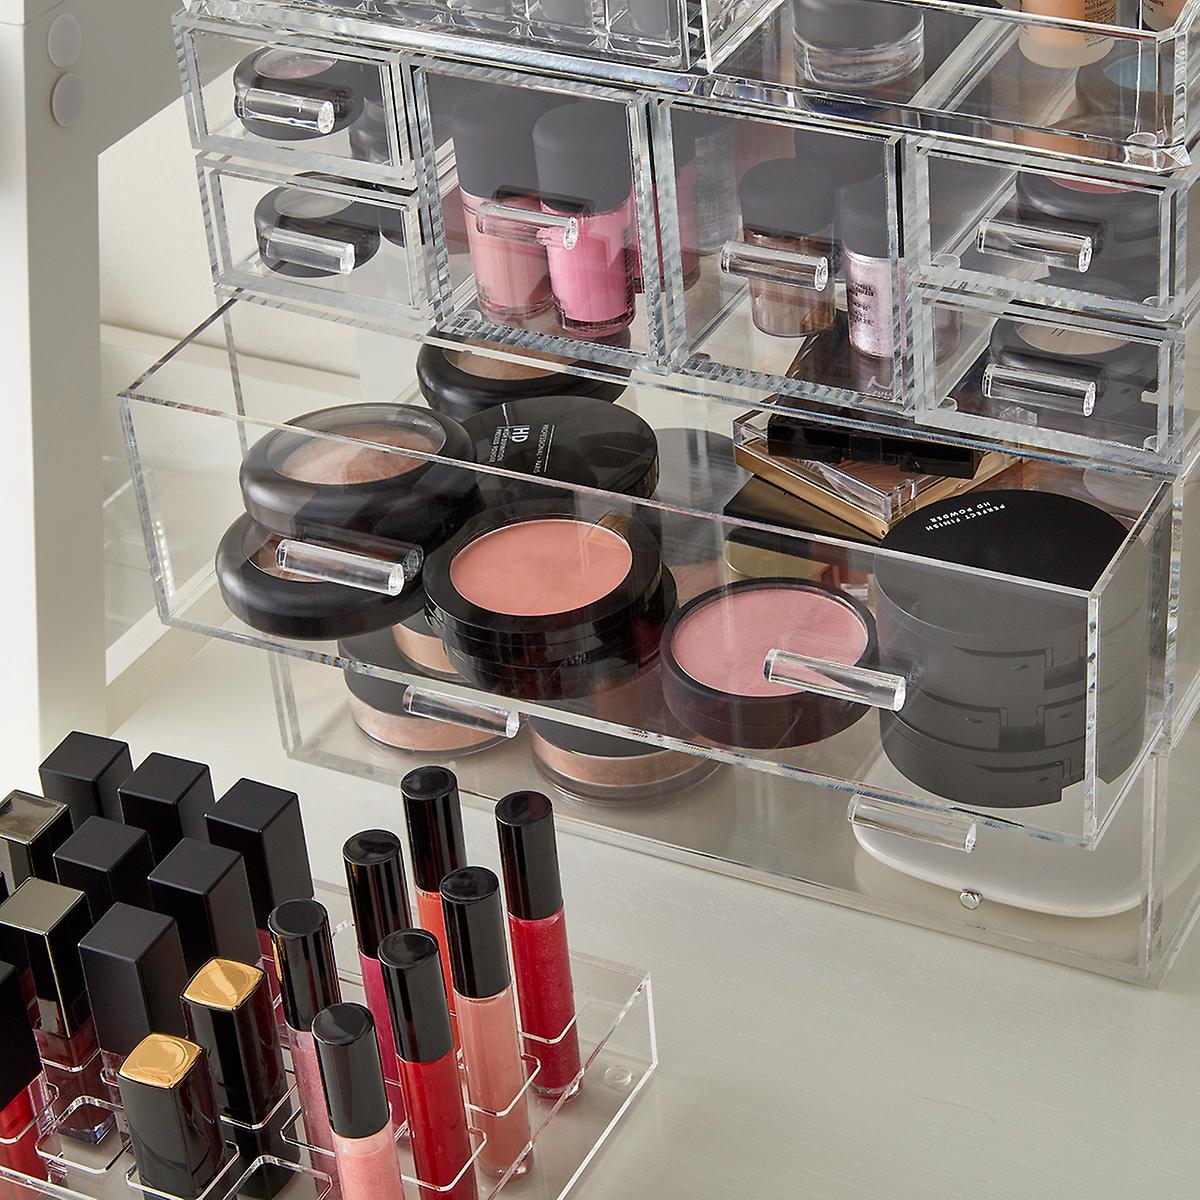 Acrylic Modular Makeup System Container Store